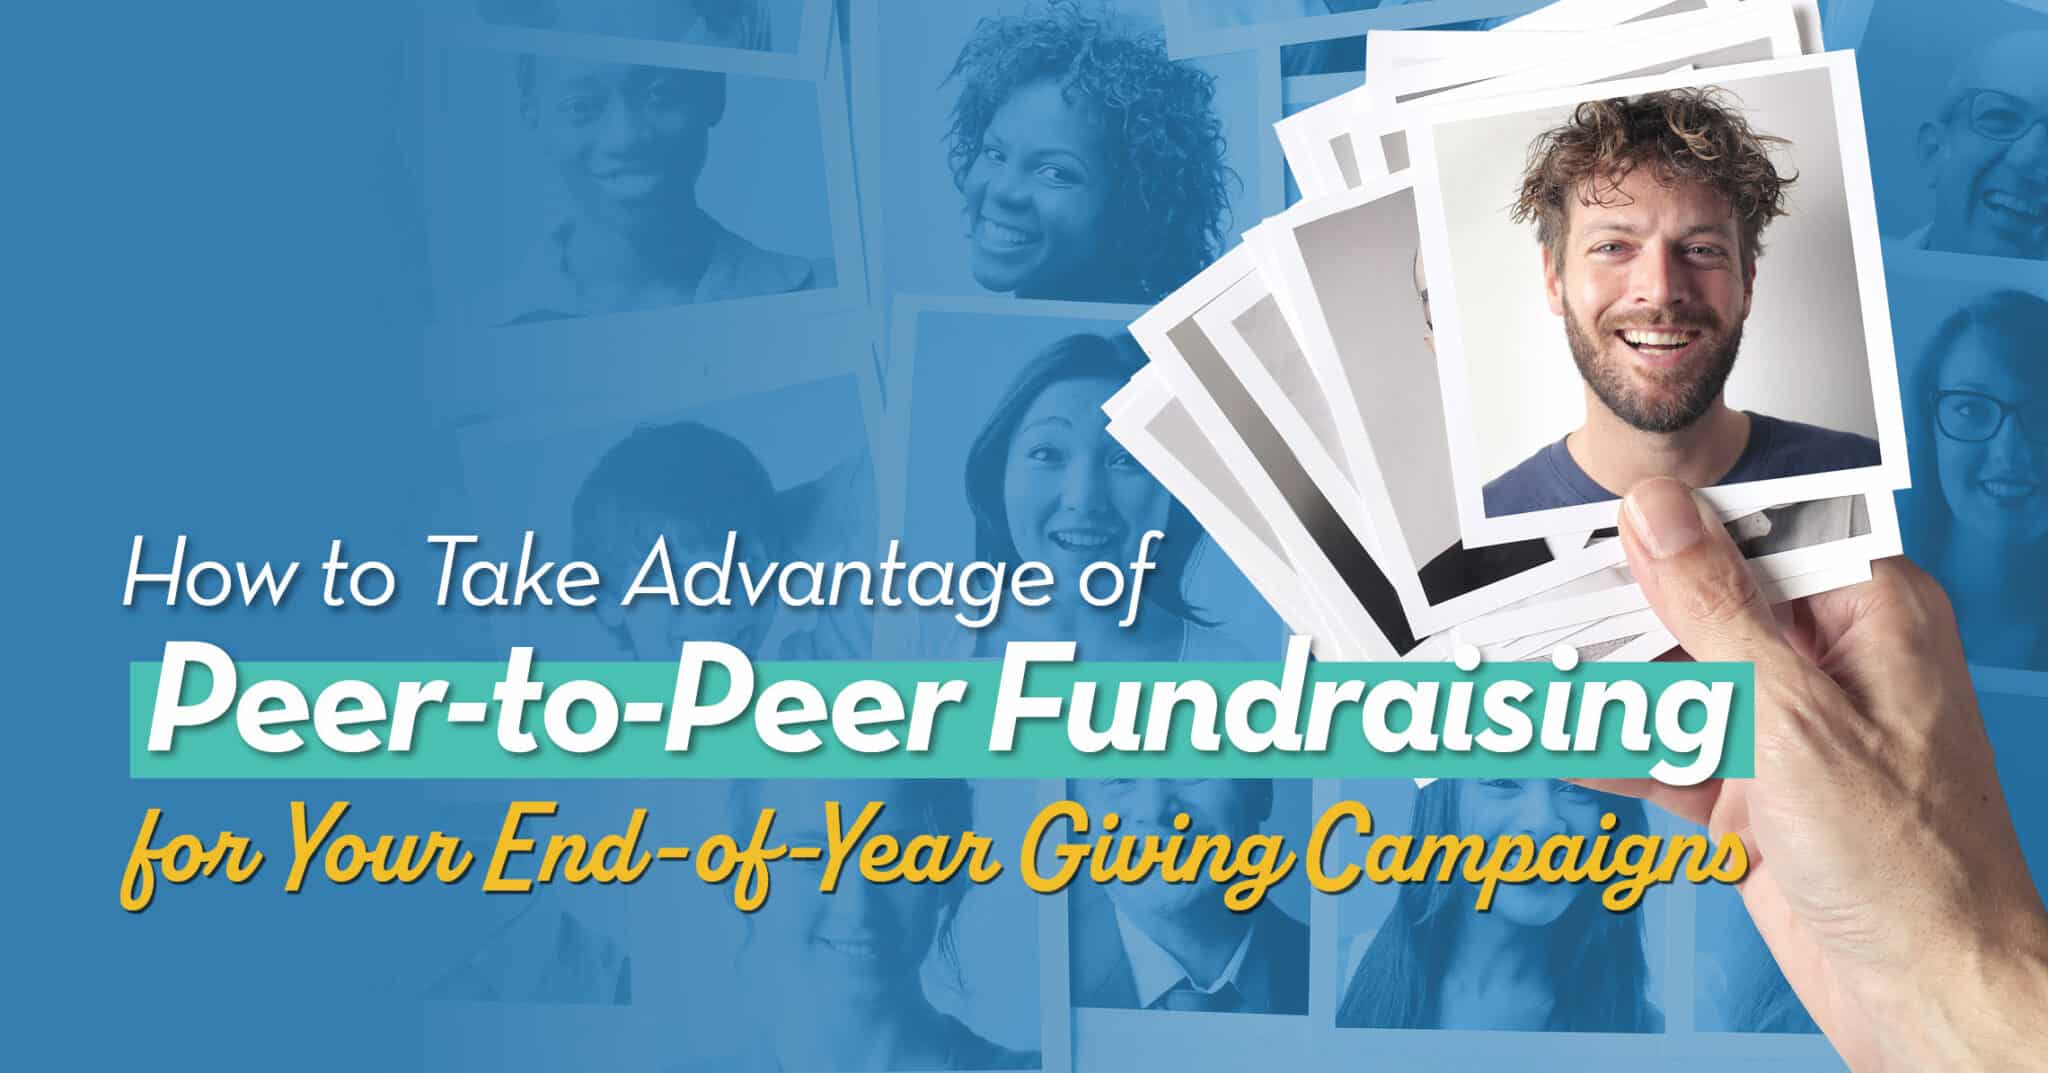 How to Take Advantage of Peer to Peer Fundraising